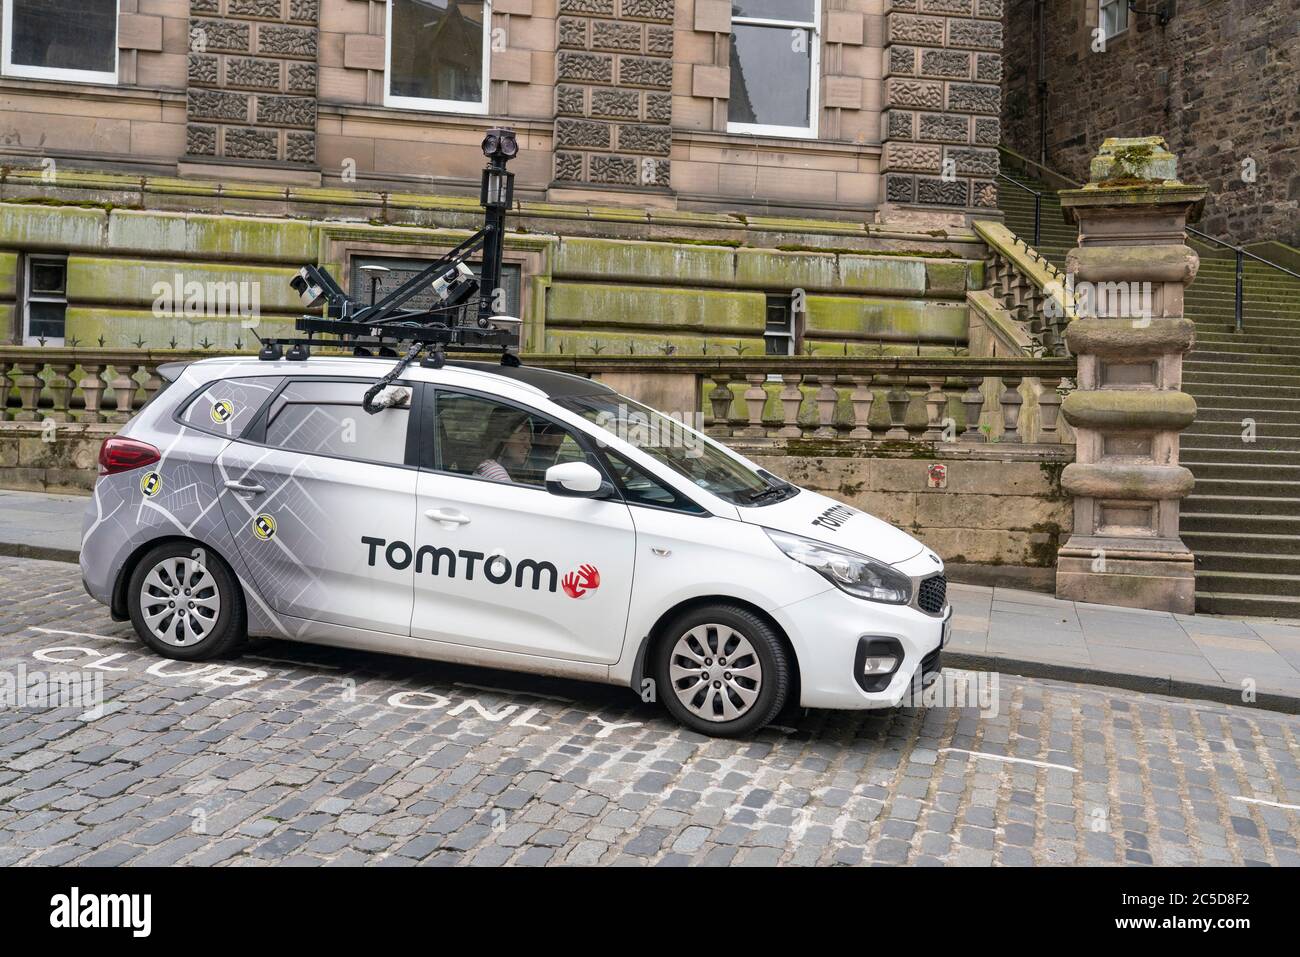 Edinburgh, Scotland, UK. 2 July, 2020. Shops and businesses are re-opening and getting back to normal in Scotland after coronavirus lockdown on such businesses were relaxed this week.  Street view car from Tom Tom driving on deserted streets in Old Town.  Iain Masterton/Alamy Live News Stock Photo